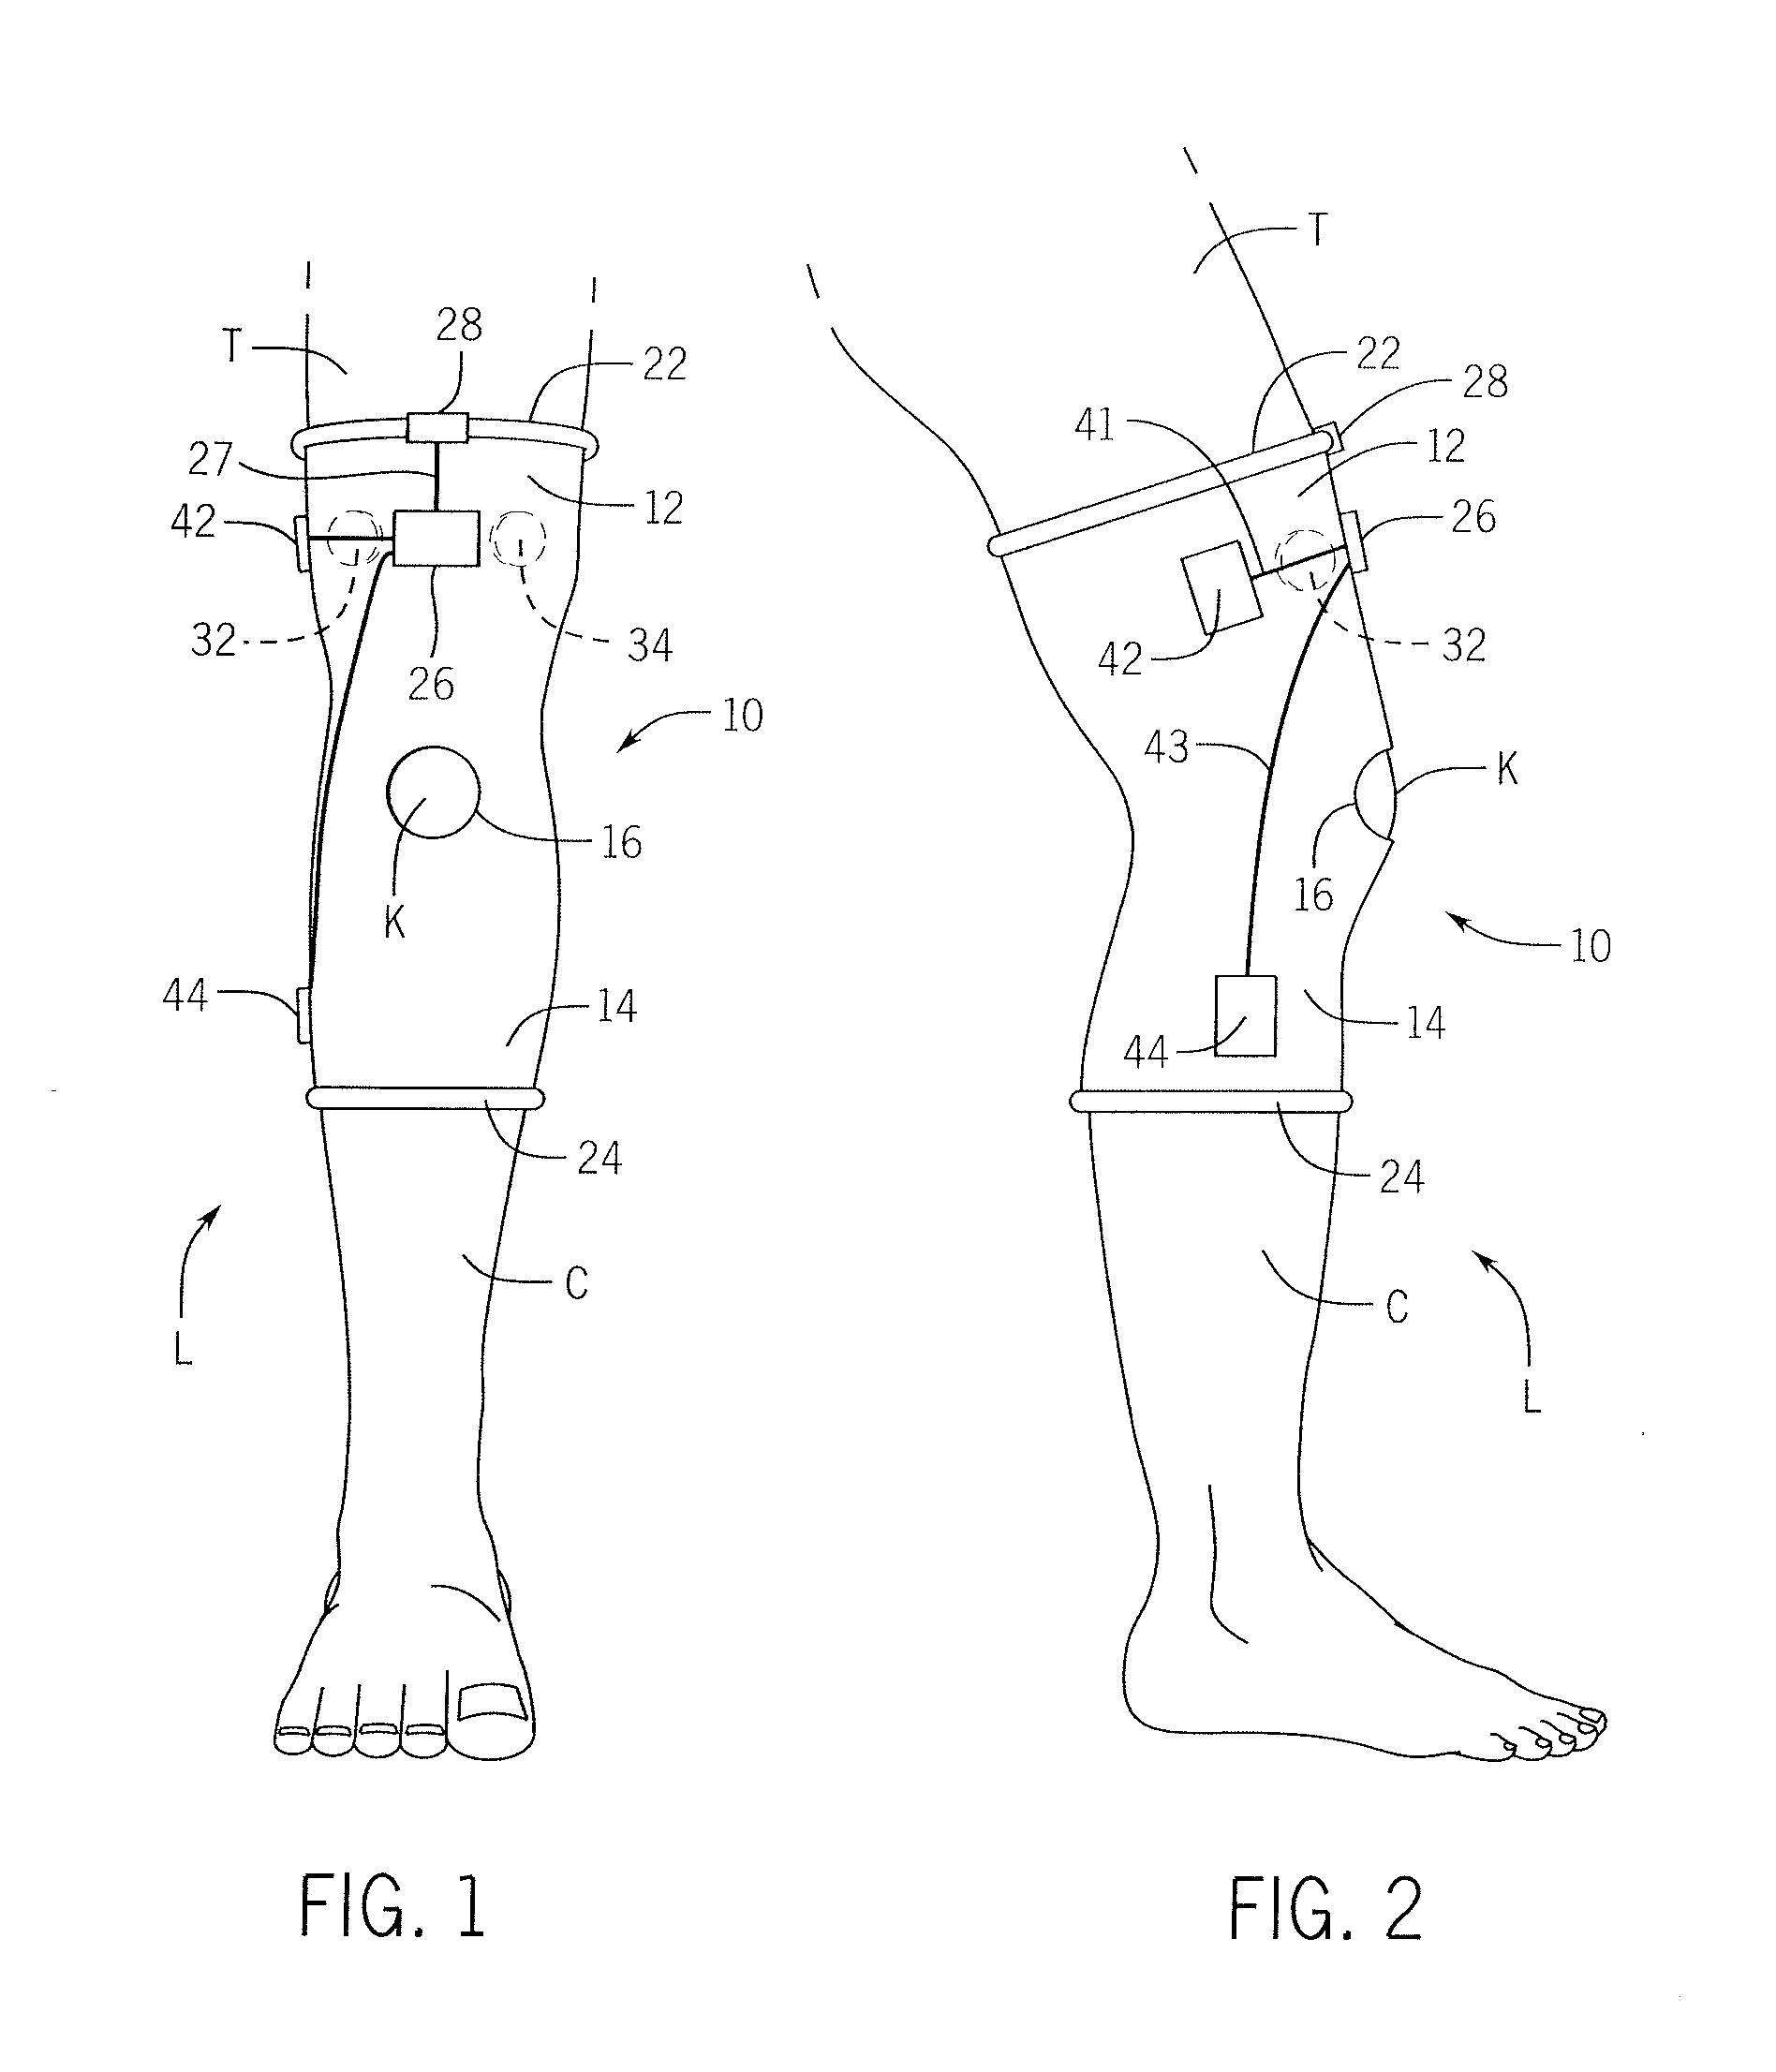 Noninvasive medical monitoring device, system and method